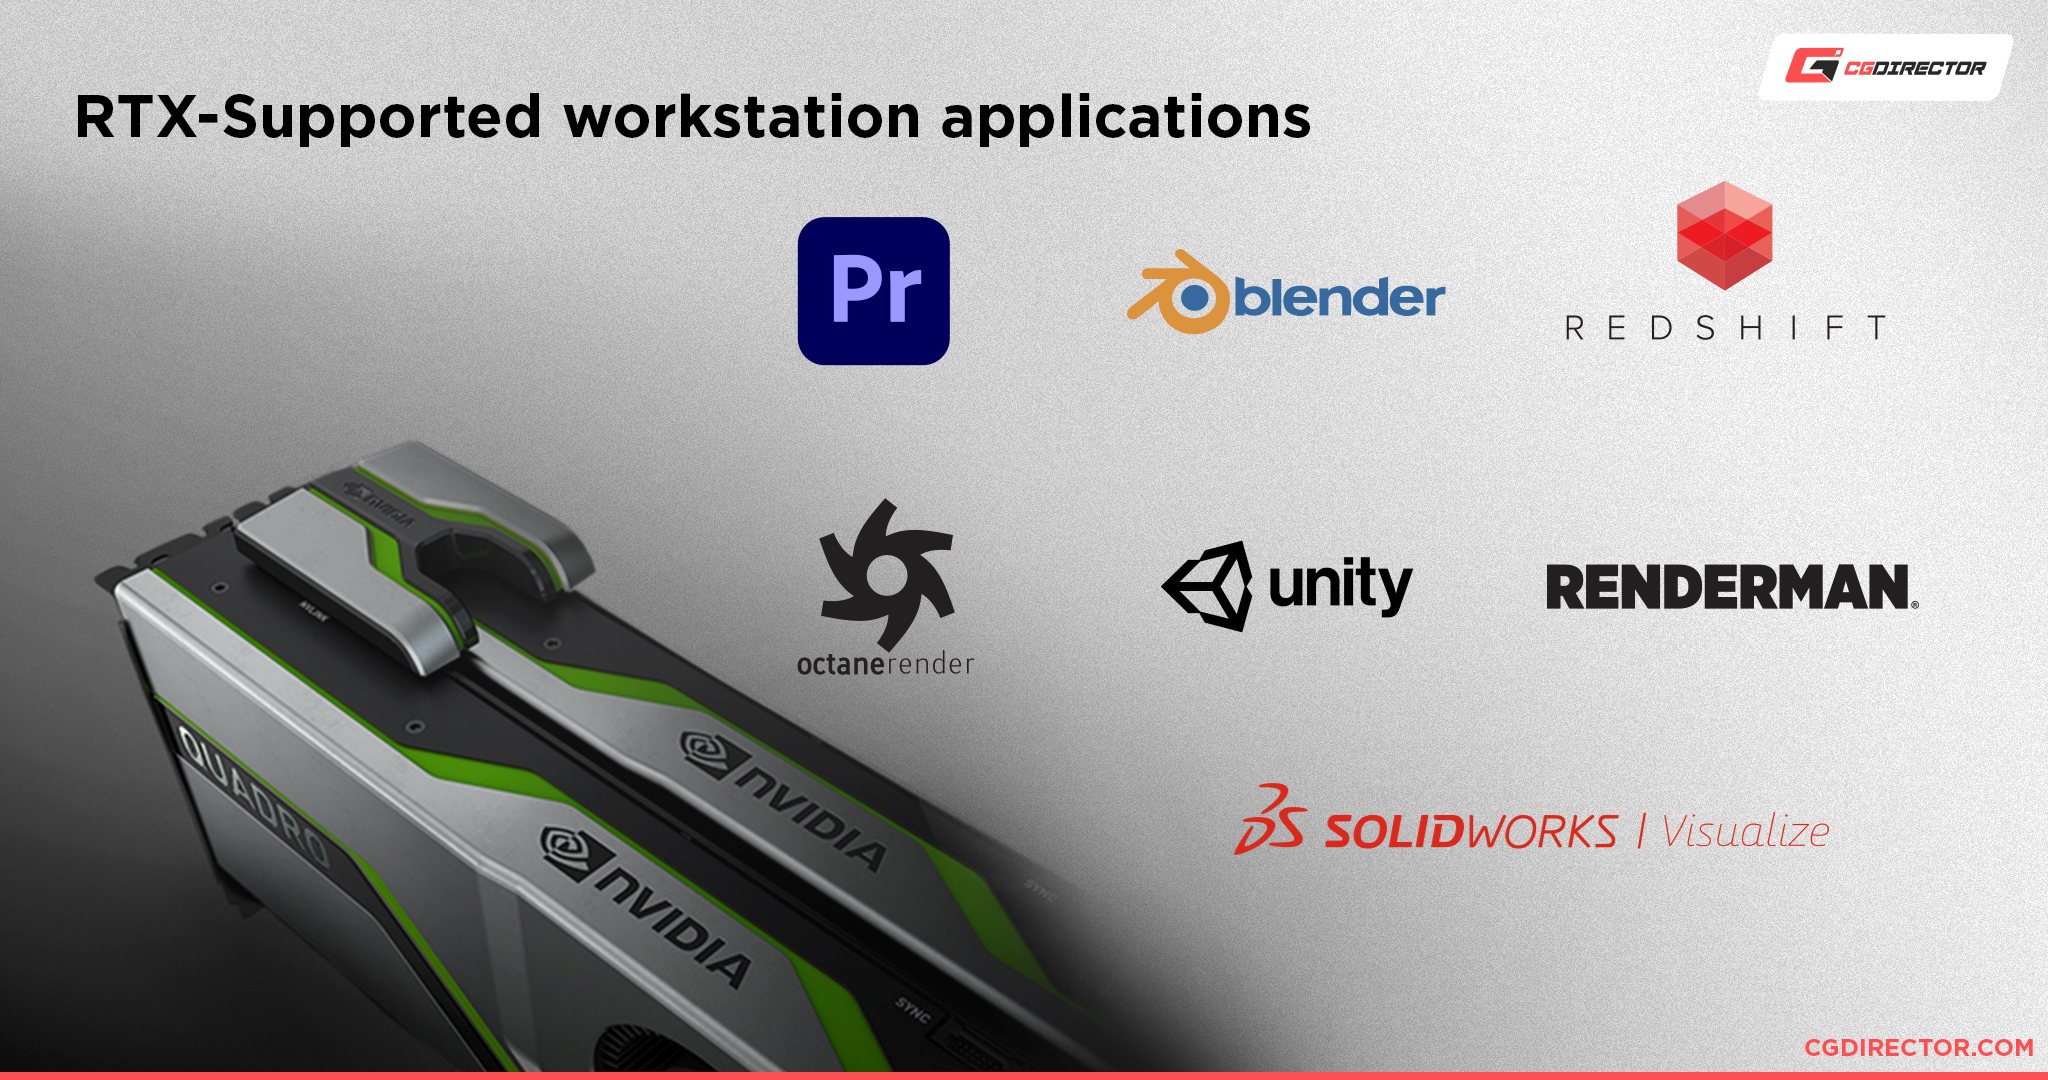 RTX-Technology Enabled Workstation Applications